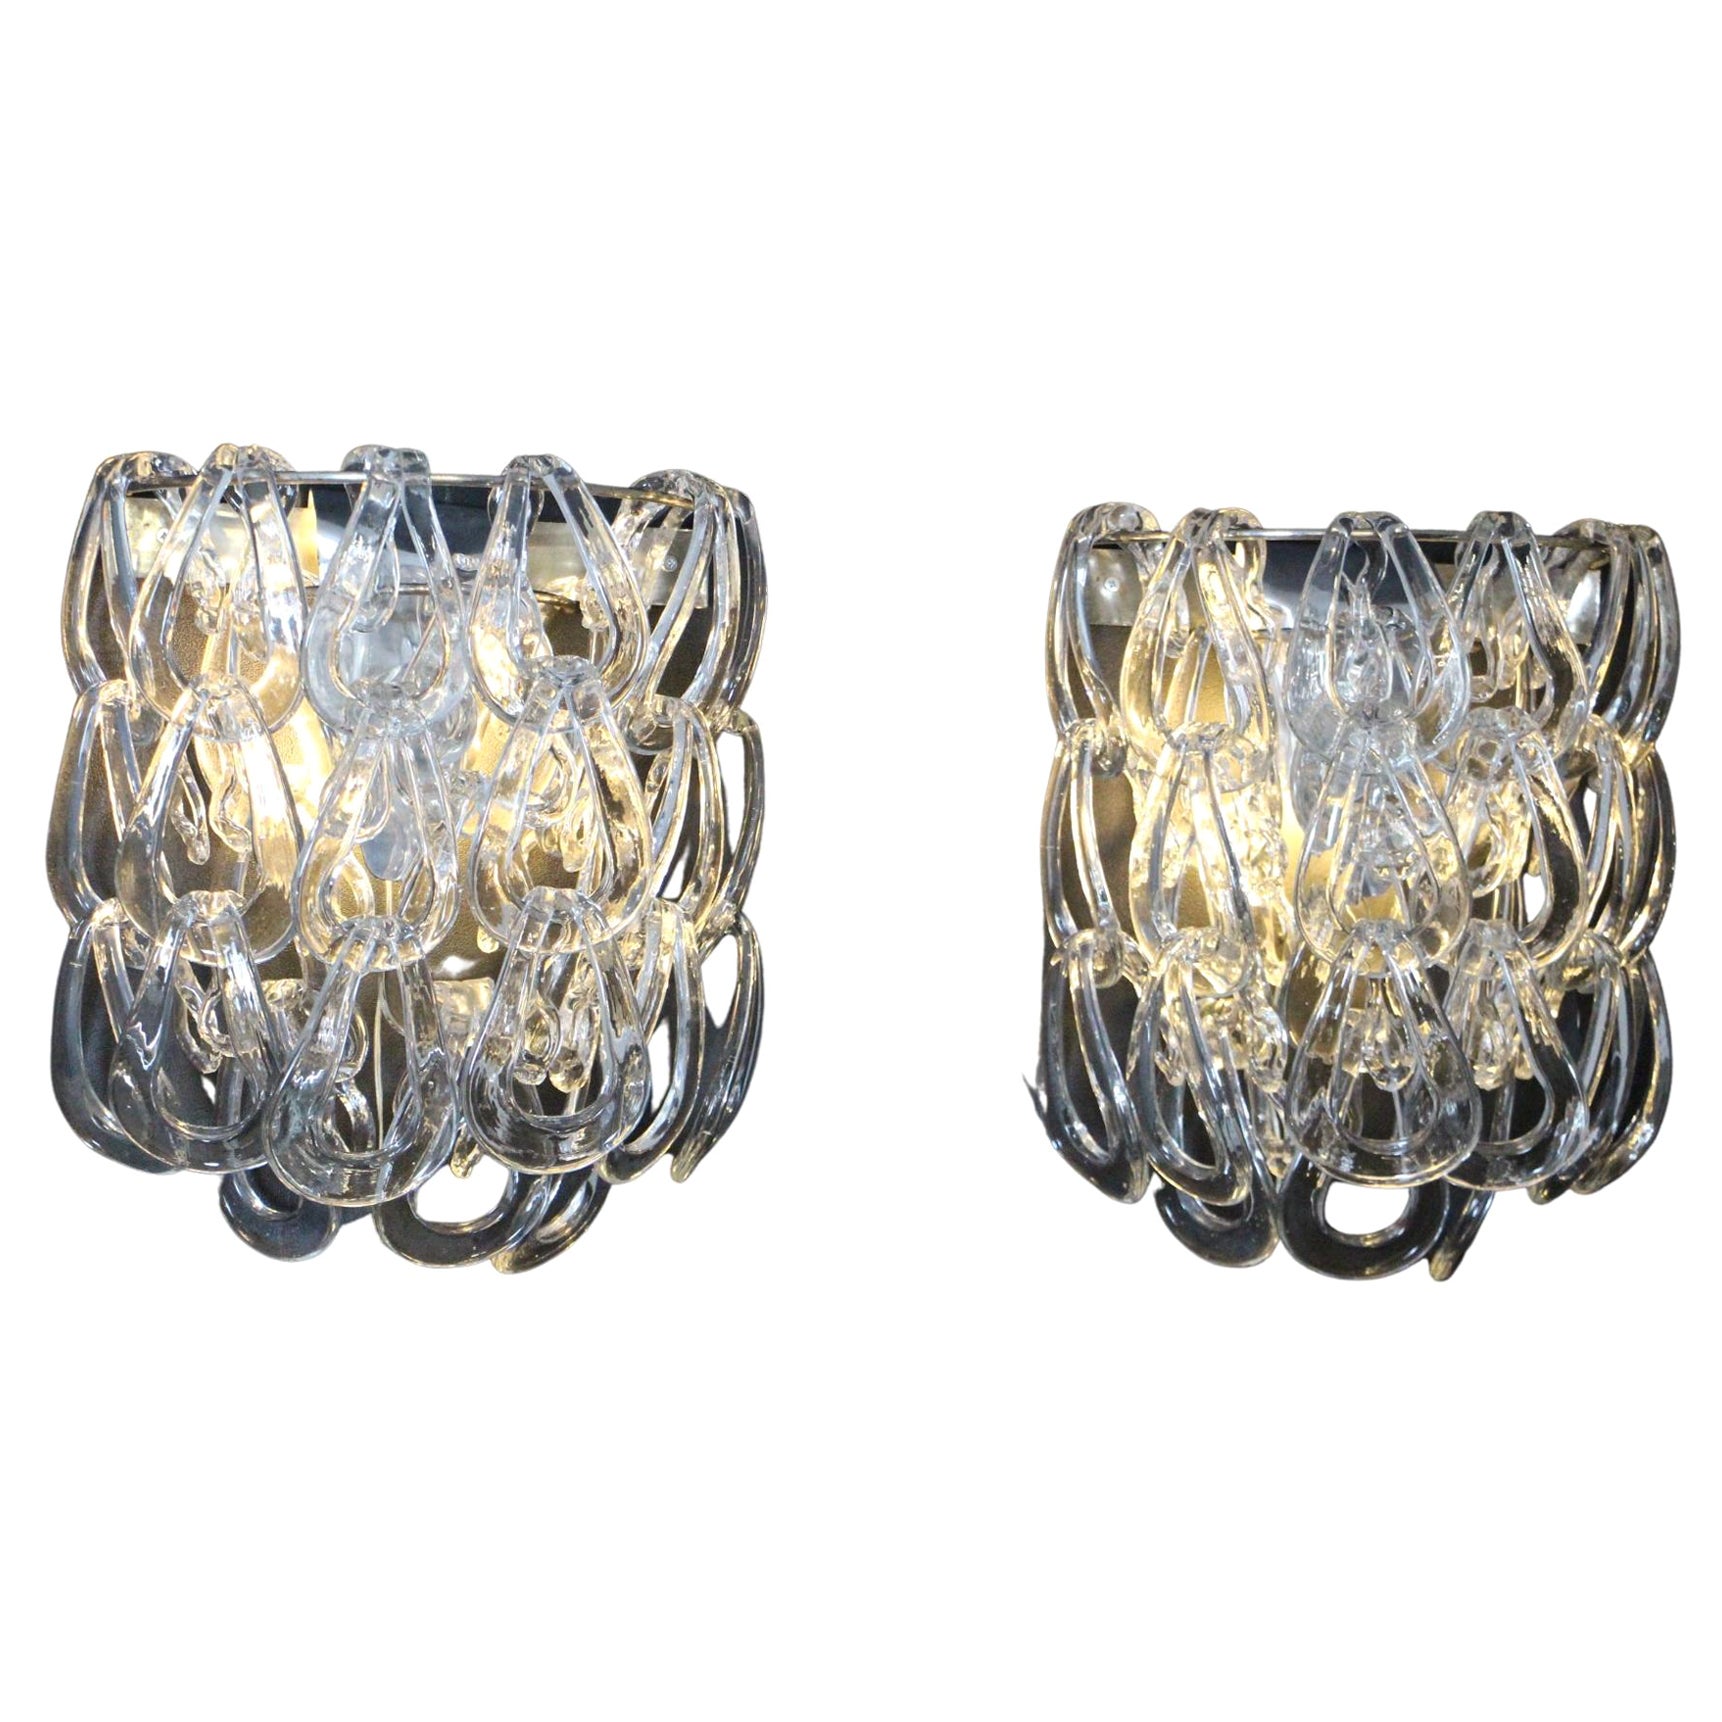 Pair of Clear Murano Glass Sconces by Angelo Mangiarotti for Vistosi, Wall Light For Sale